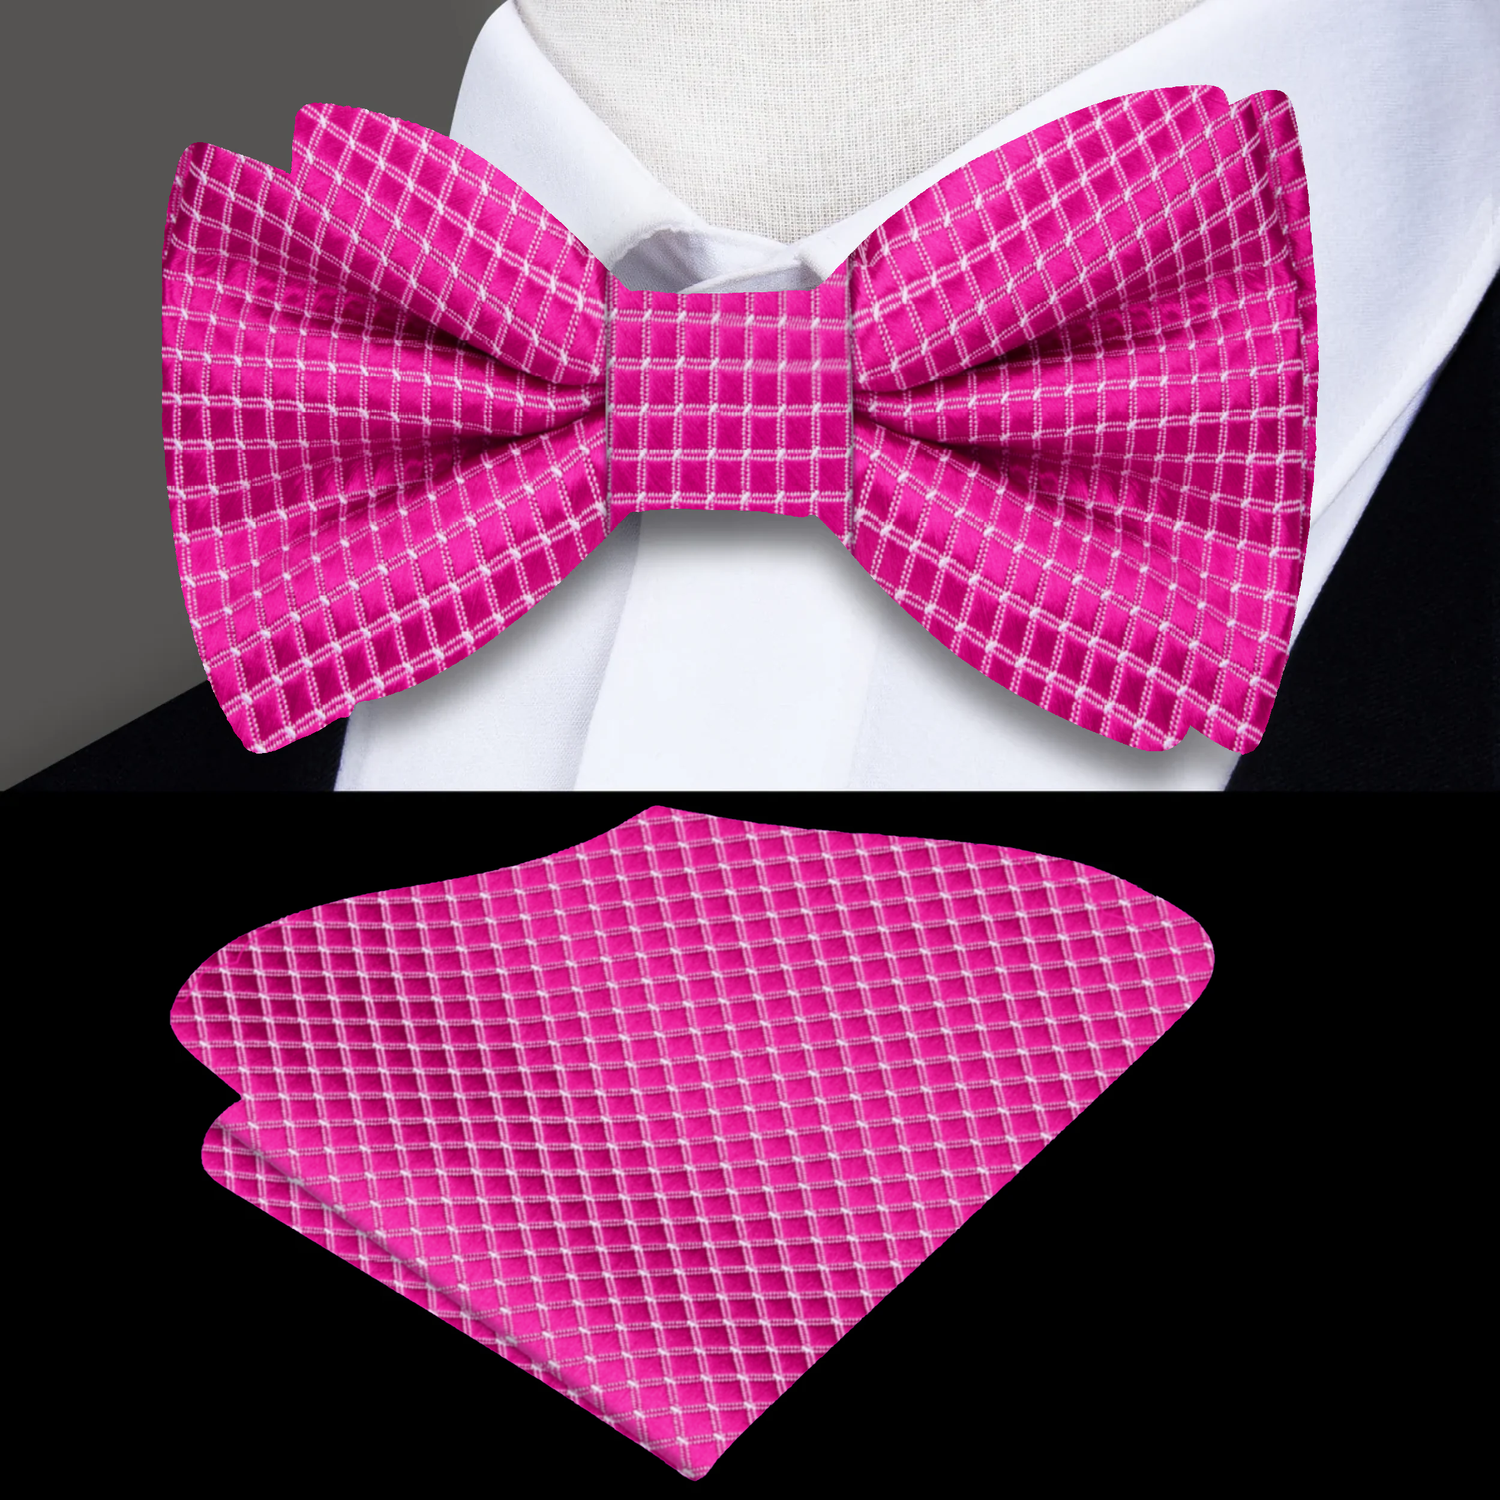 Main View: Pink with White Geometric Texture Bow Tie and Pocket Square